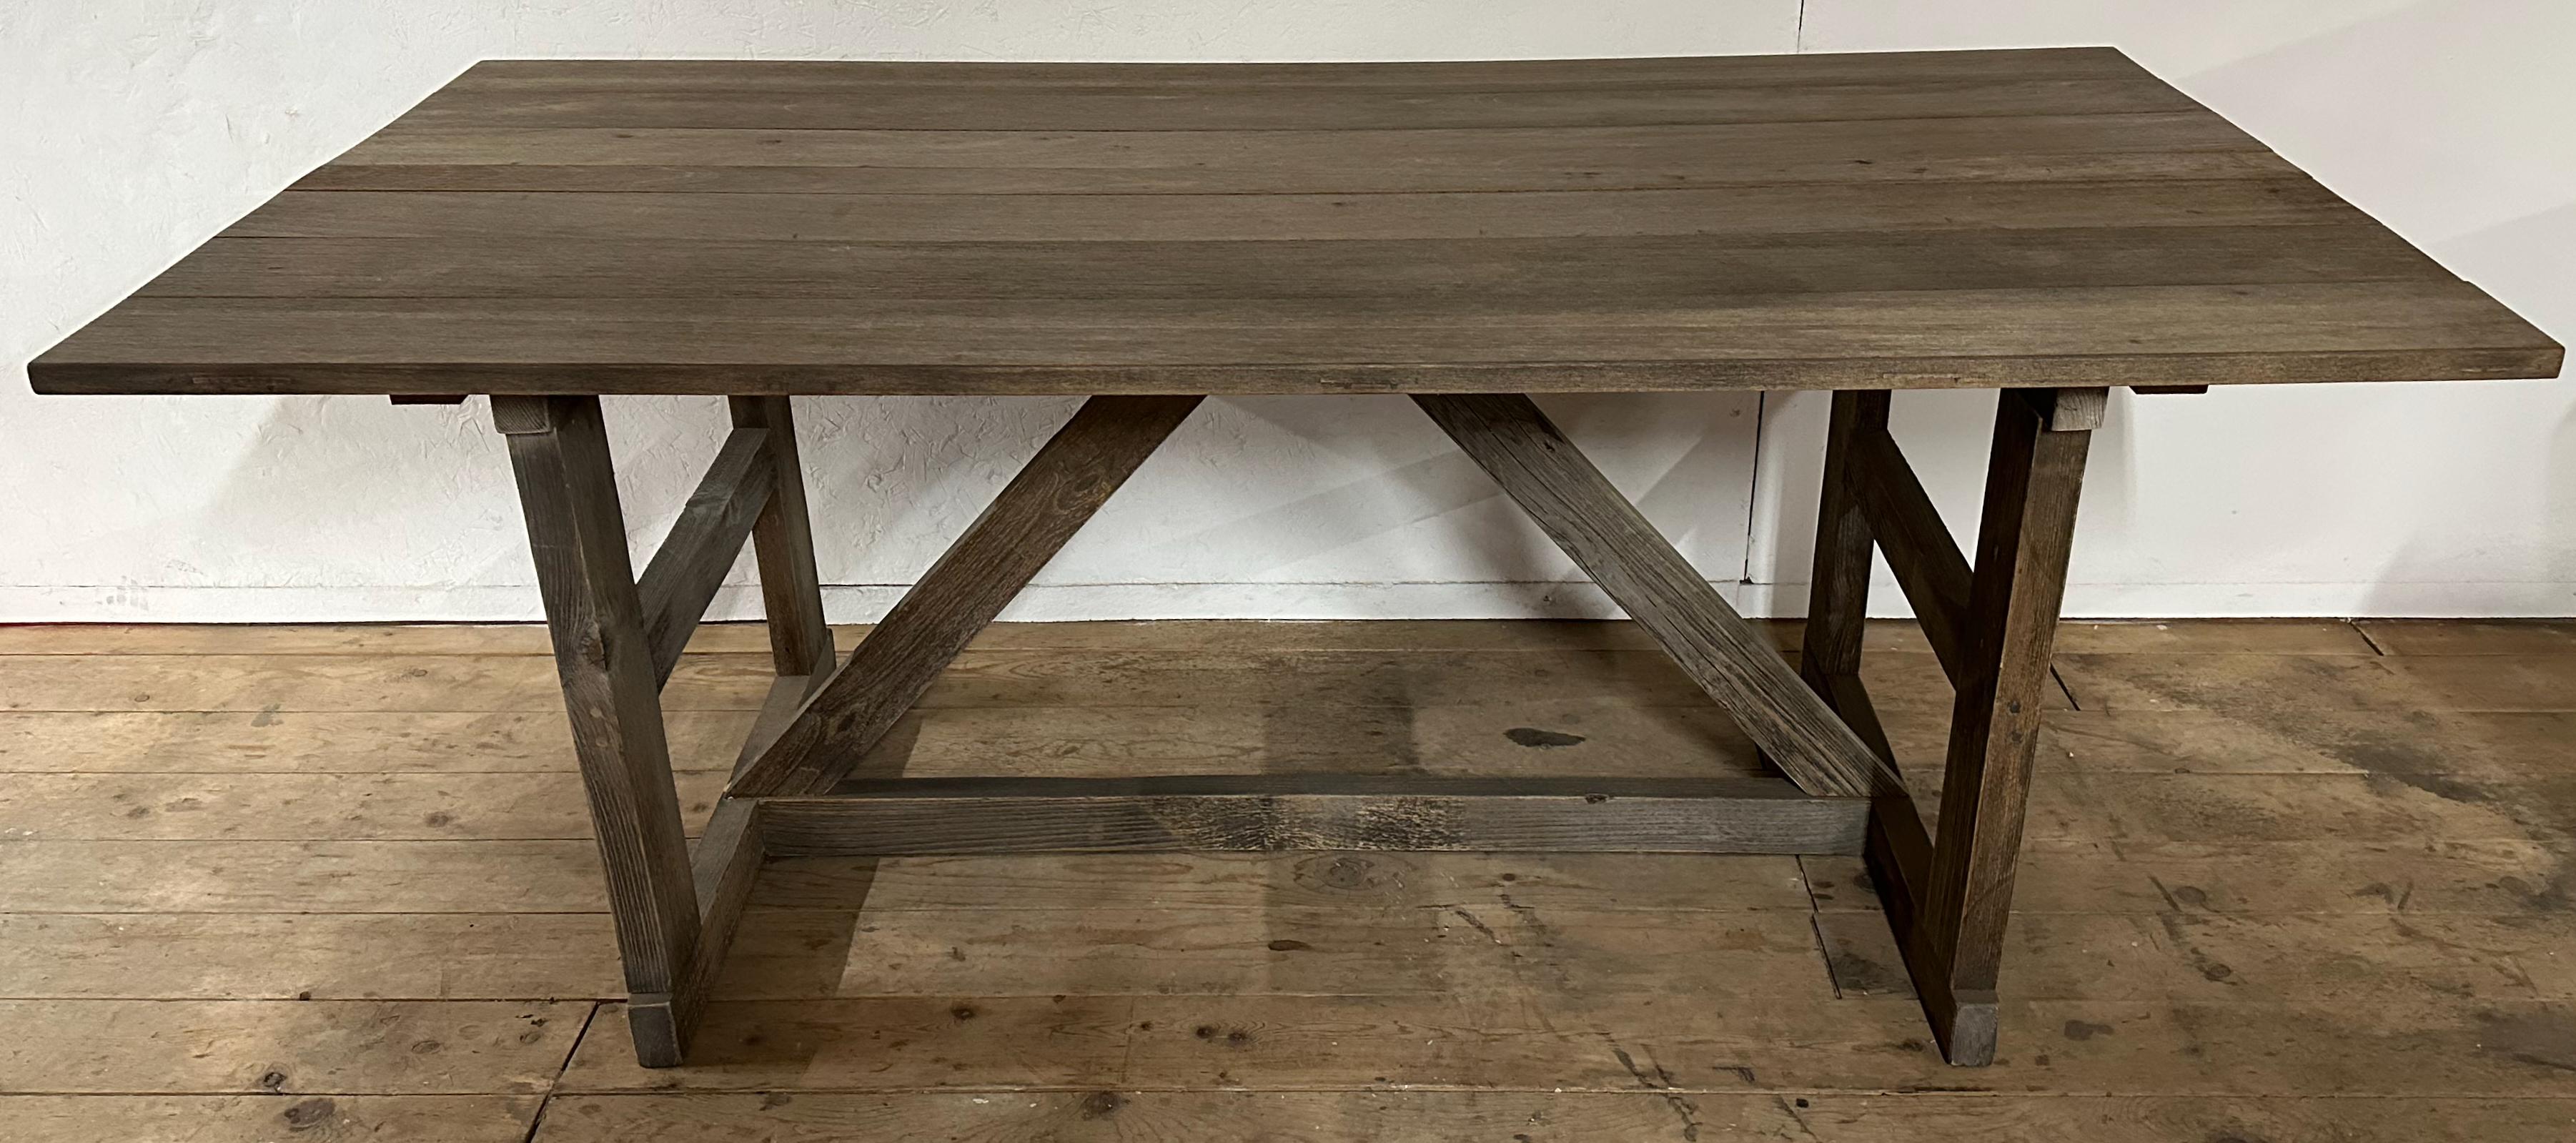 Hand-Crafted Rustic Vintage Farm or Work Table For Sale